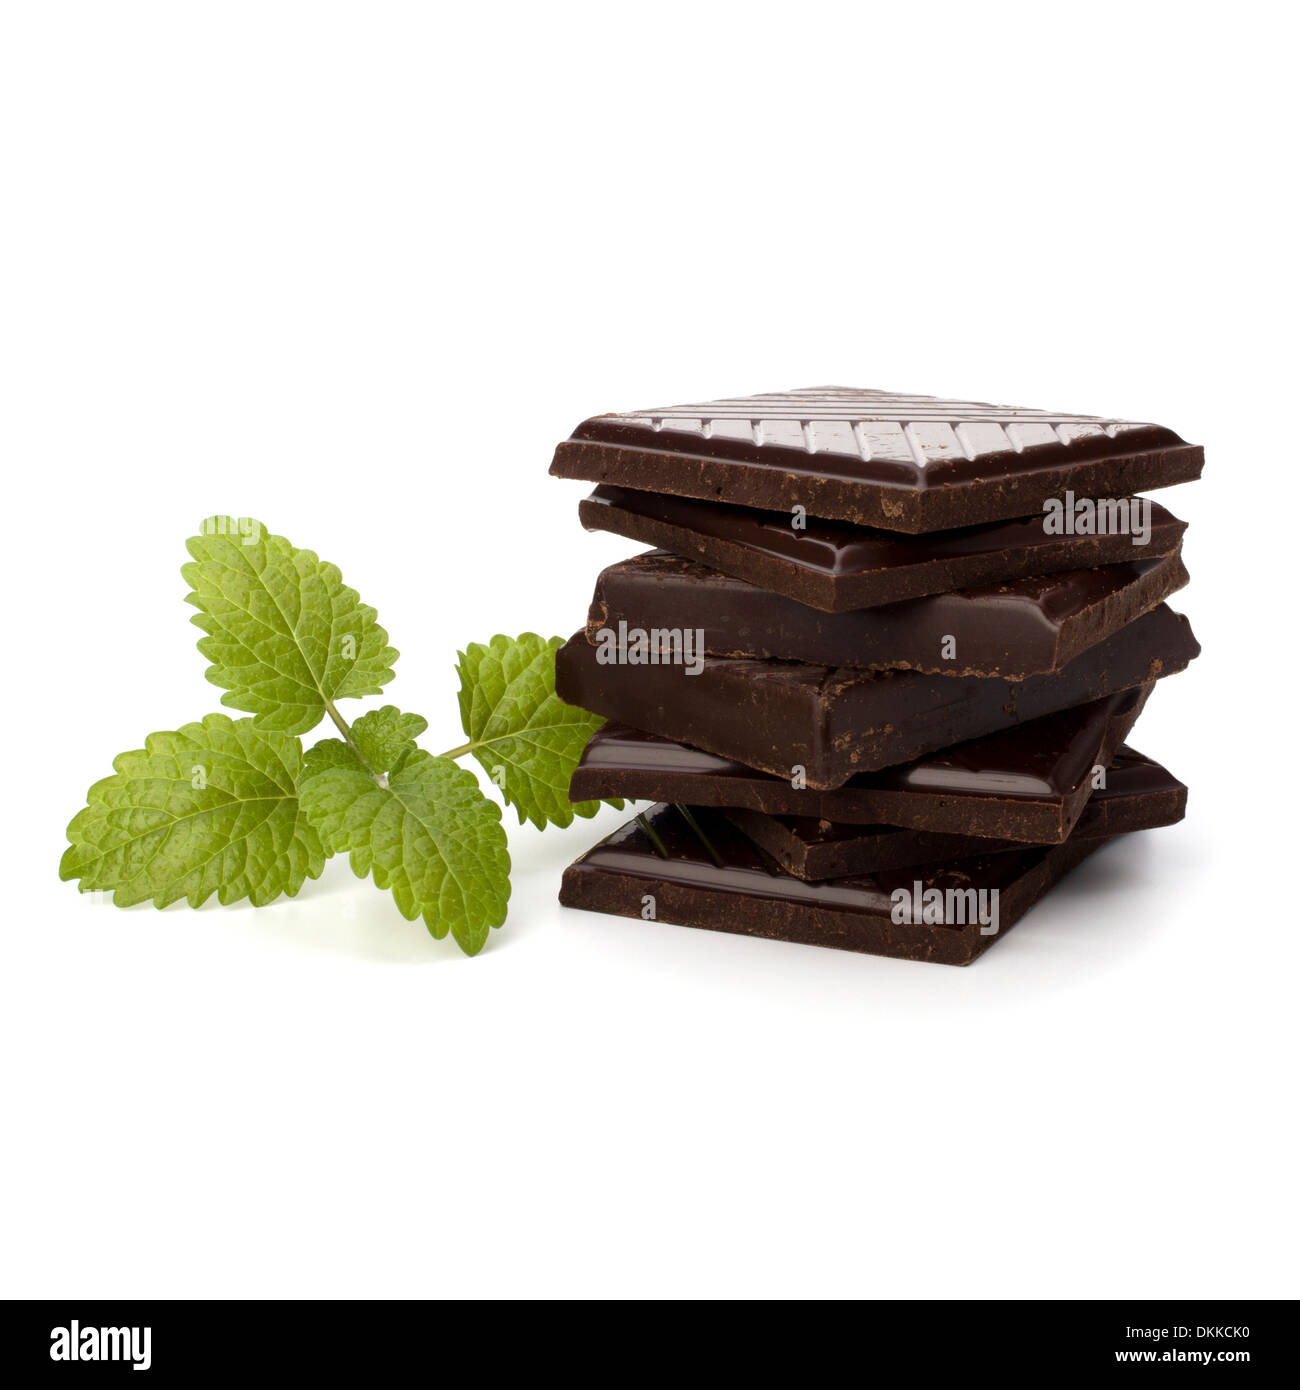 Chocolate bars stack and mint leaf isolated on white background Stock Photo